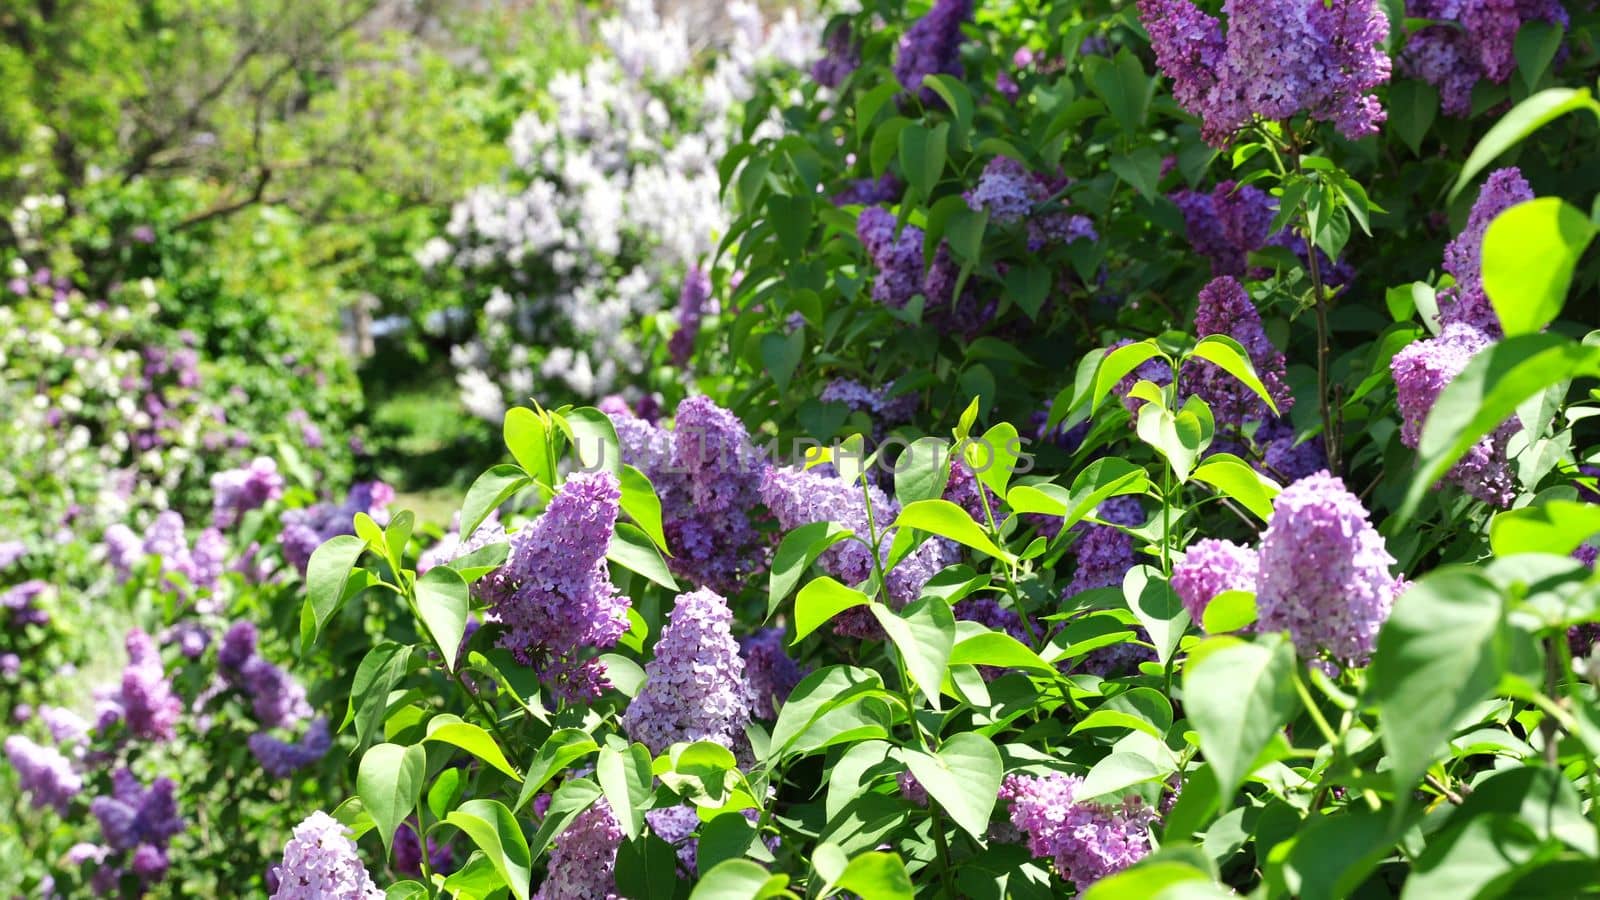 Blossom lilac flowers in spring in garden. branch of Blossoming purple lilacs in spring. Blooming lilac bush. Spring season, nature background